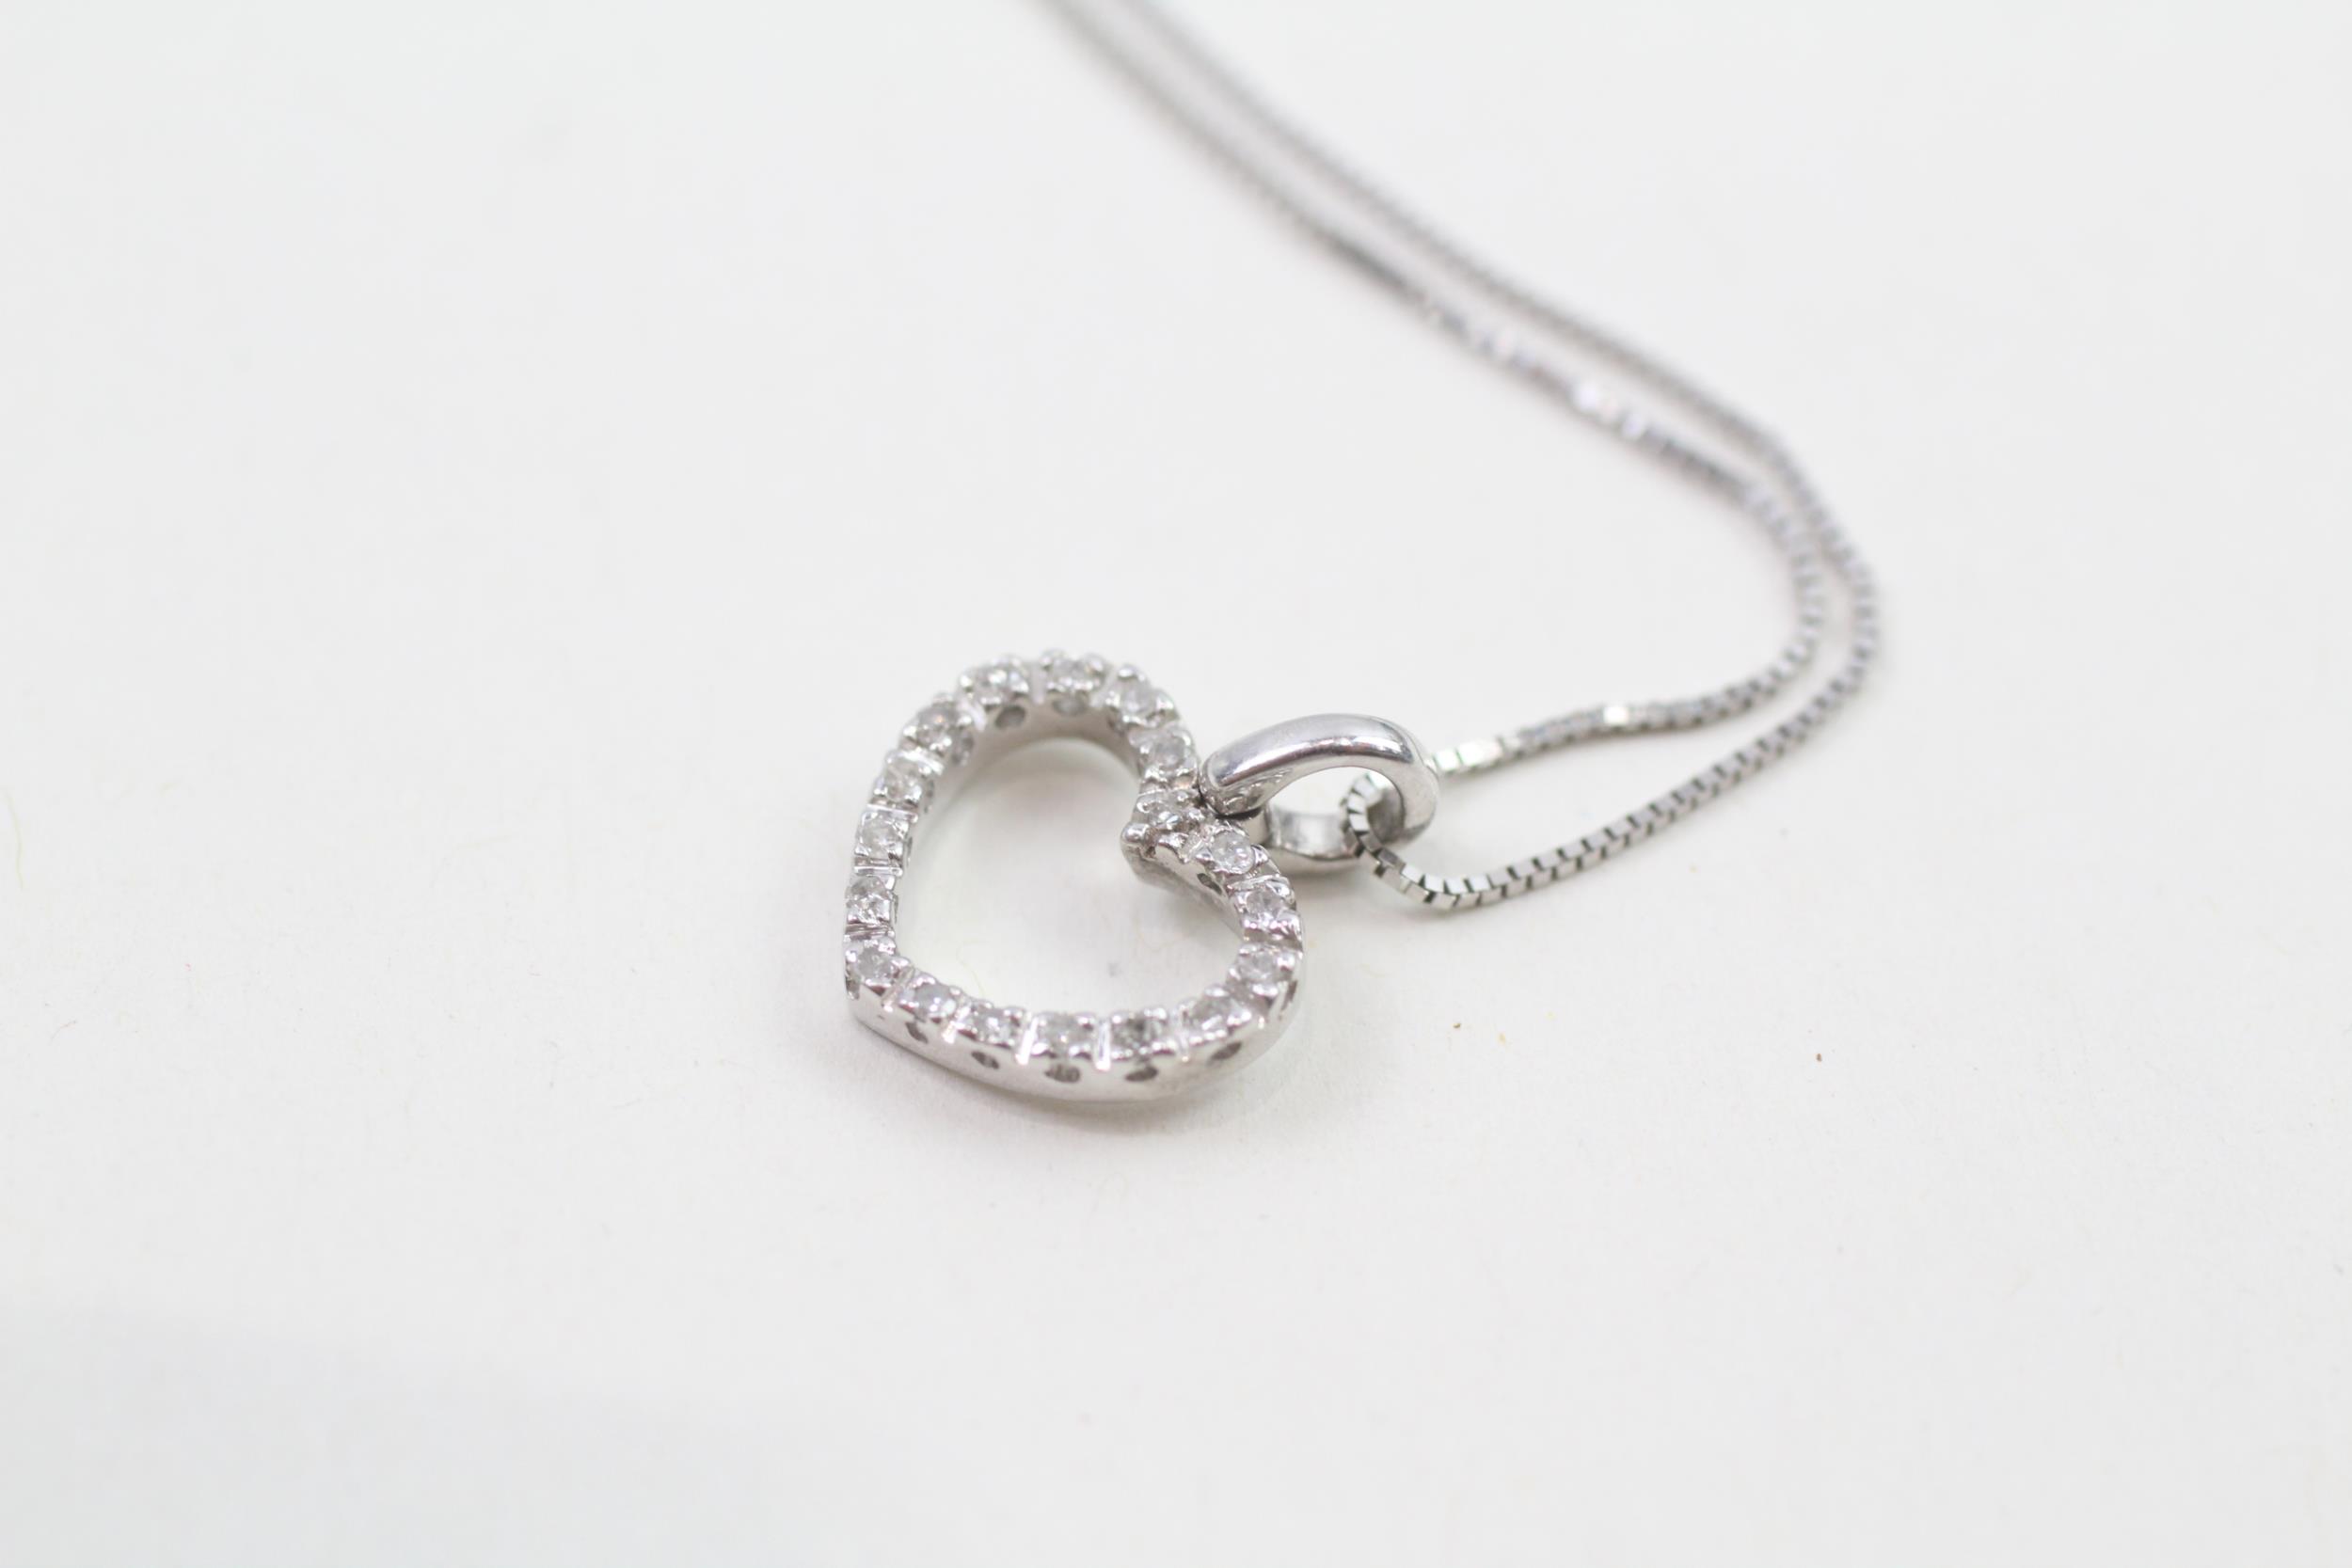 9ct white gold diamond heart pendant necklace (2.1g) - Image 3 of 4